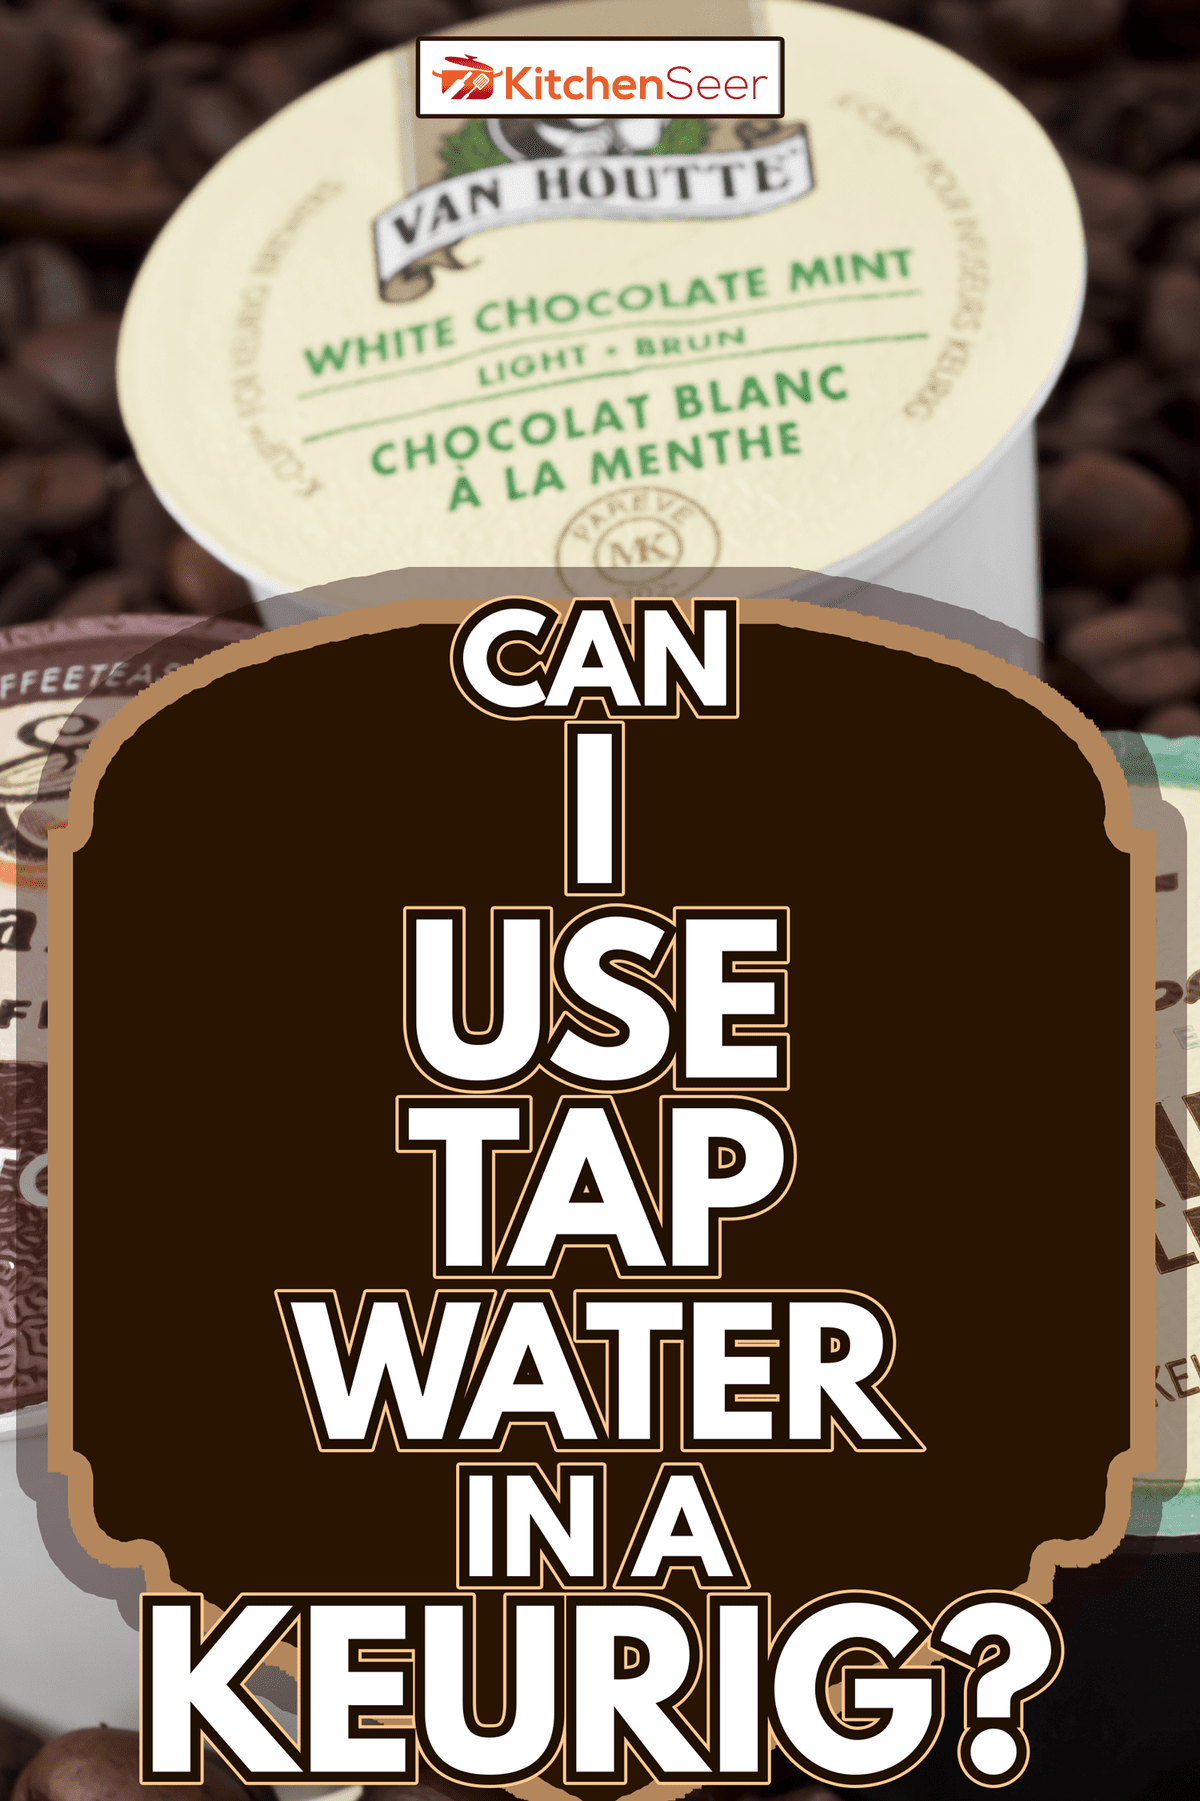 A variety of k-cups used for the Keurig single serve coffee make - Can I Use Tap Water In A Keurig